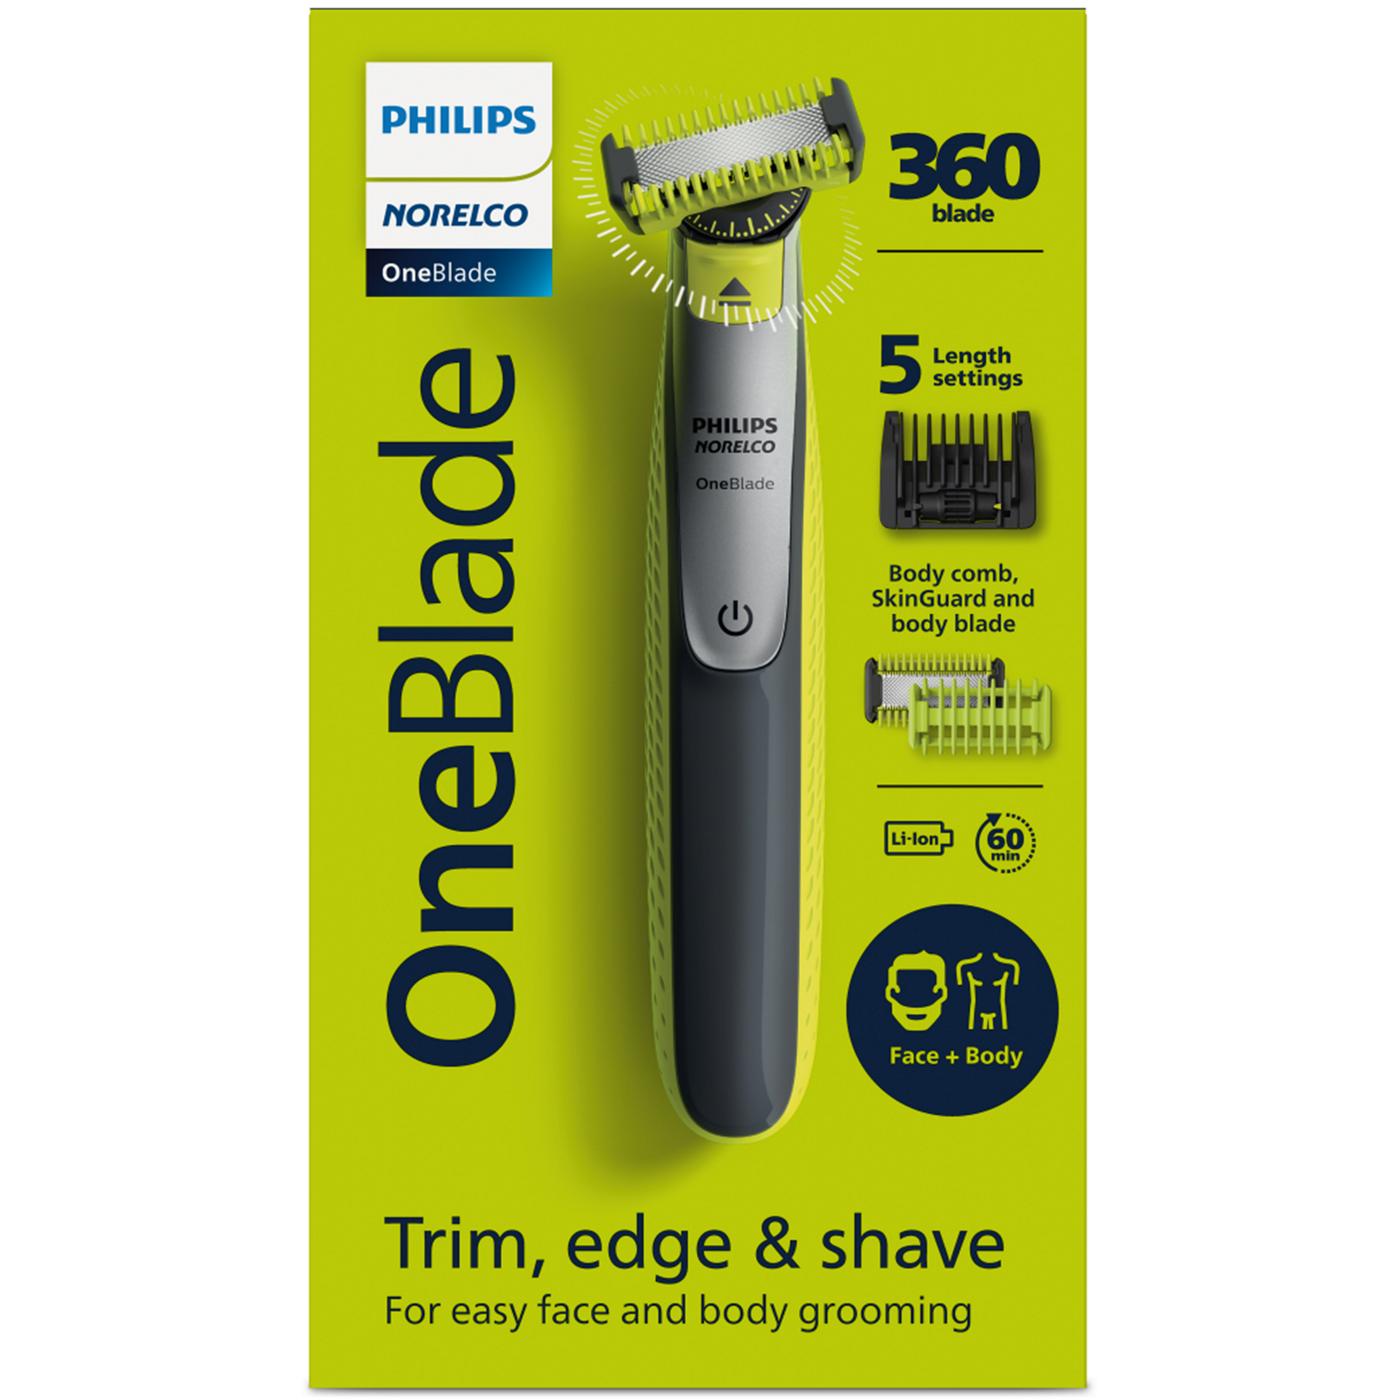 Philips Norelco OneBlade 360 Face & Body Electric Trimmer; image 1 of 4